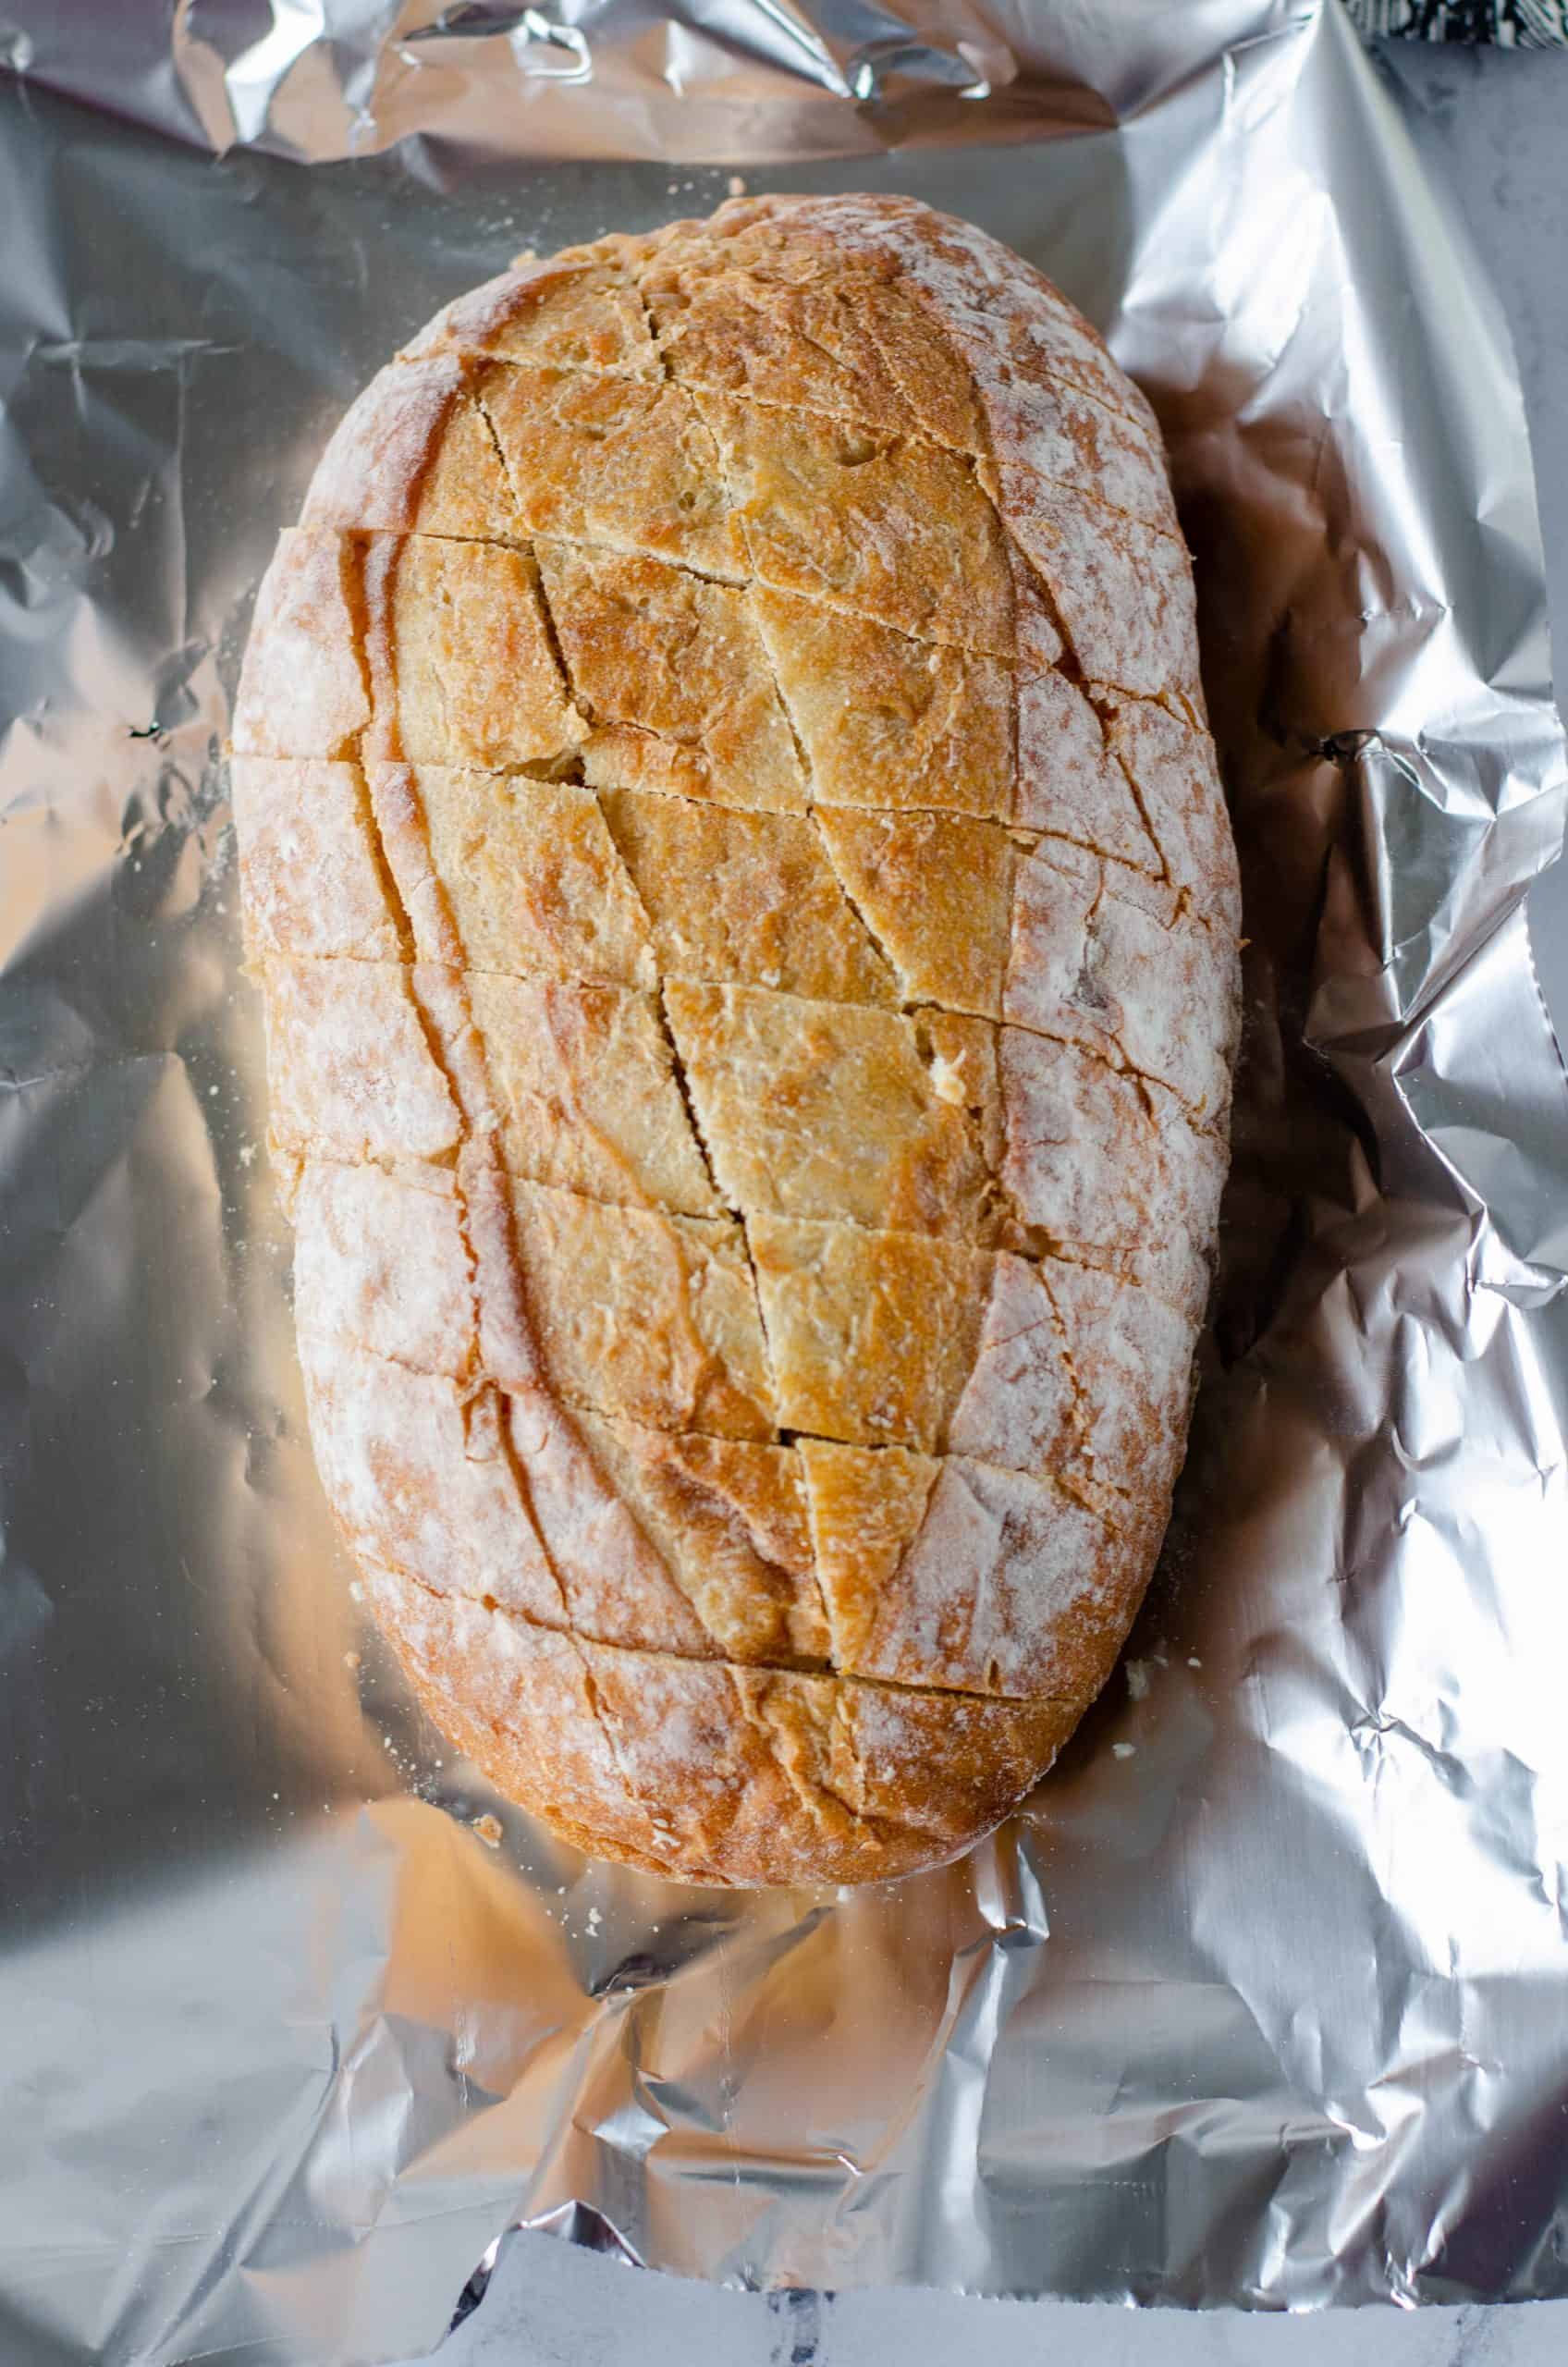 oval ciabatta loaf bread cut diagonally in two directions, bread shown on aluminum foil.